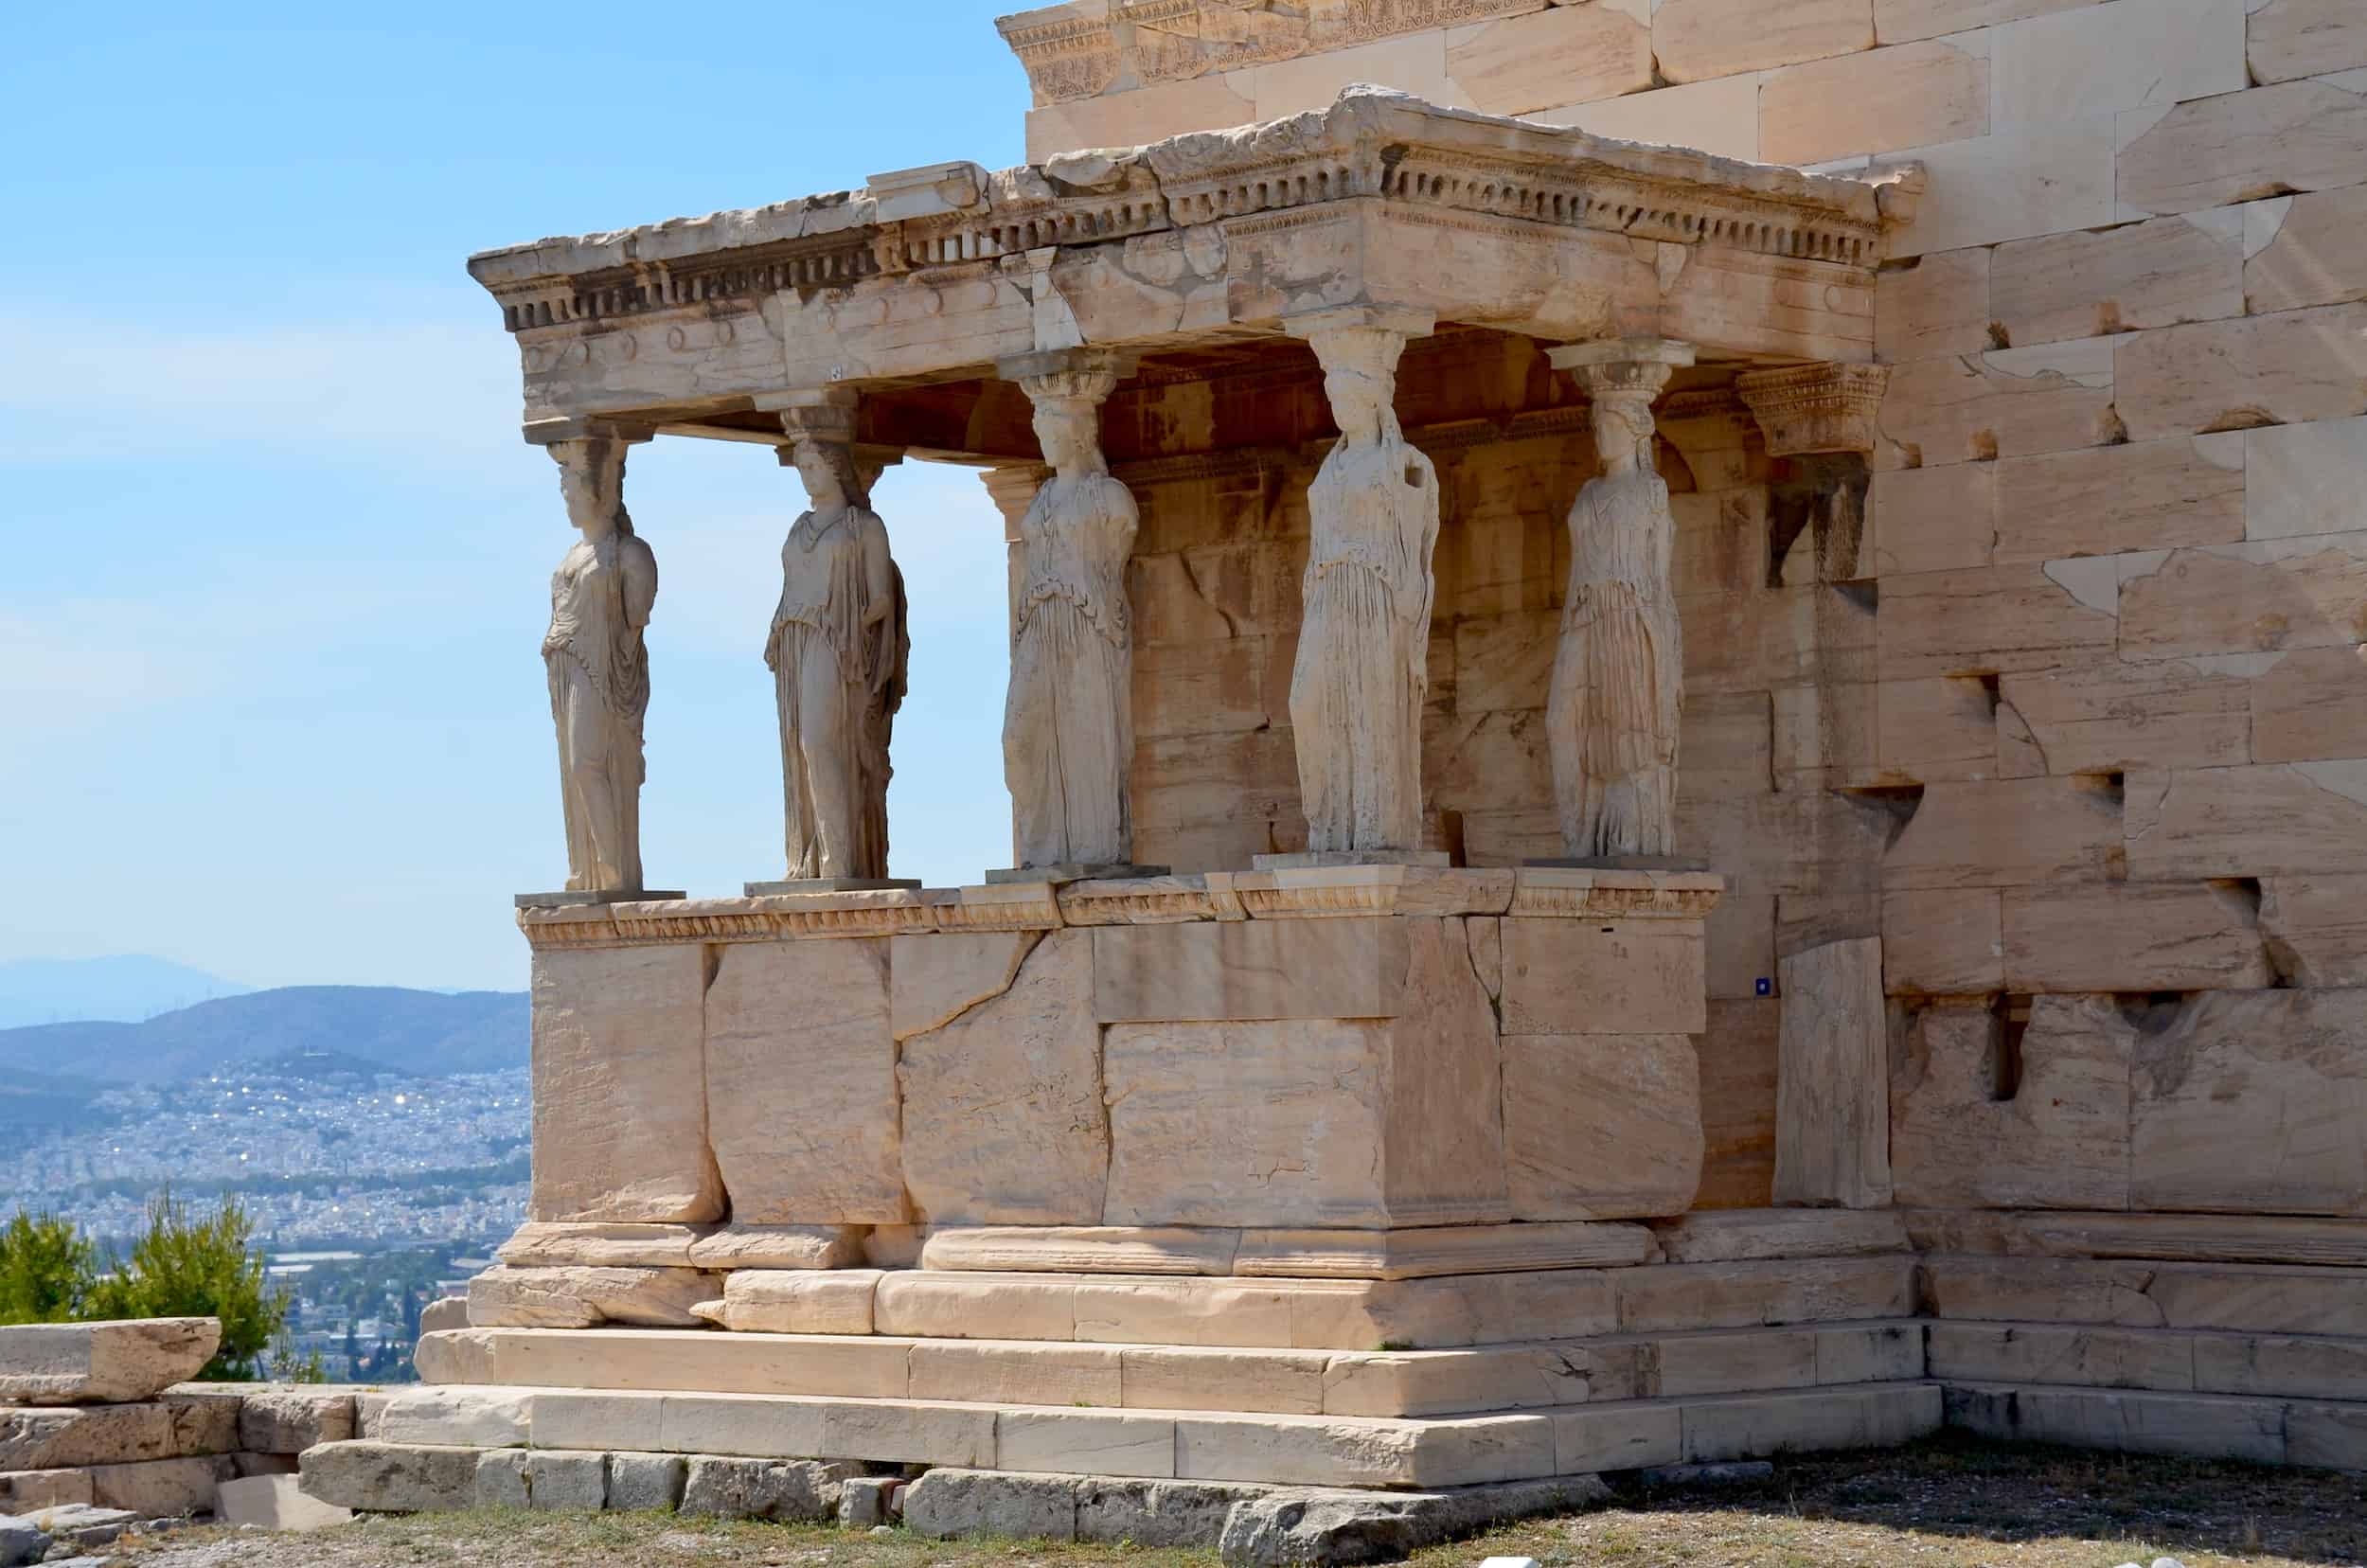 Porch of the Caryatids on the Erechtheion on the Acropolis in Athens, Greece